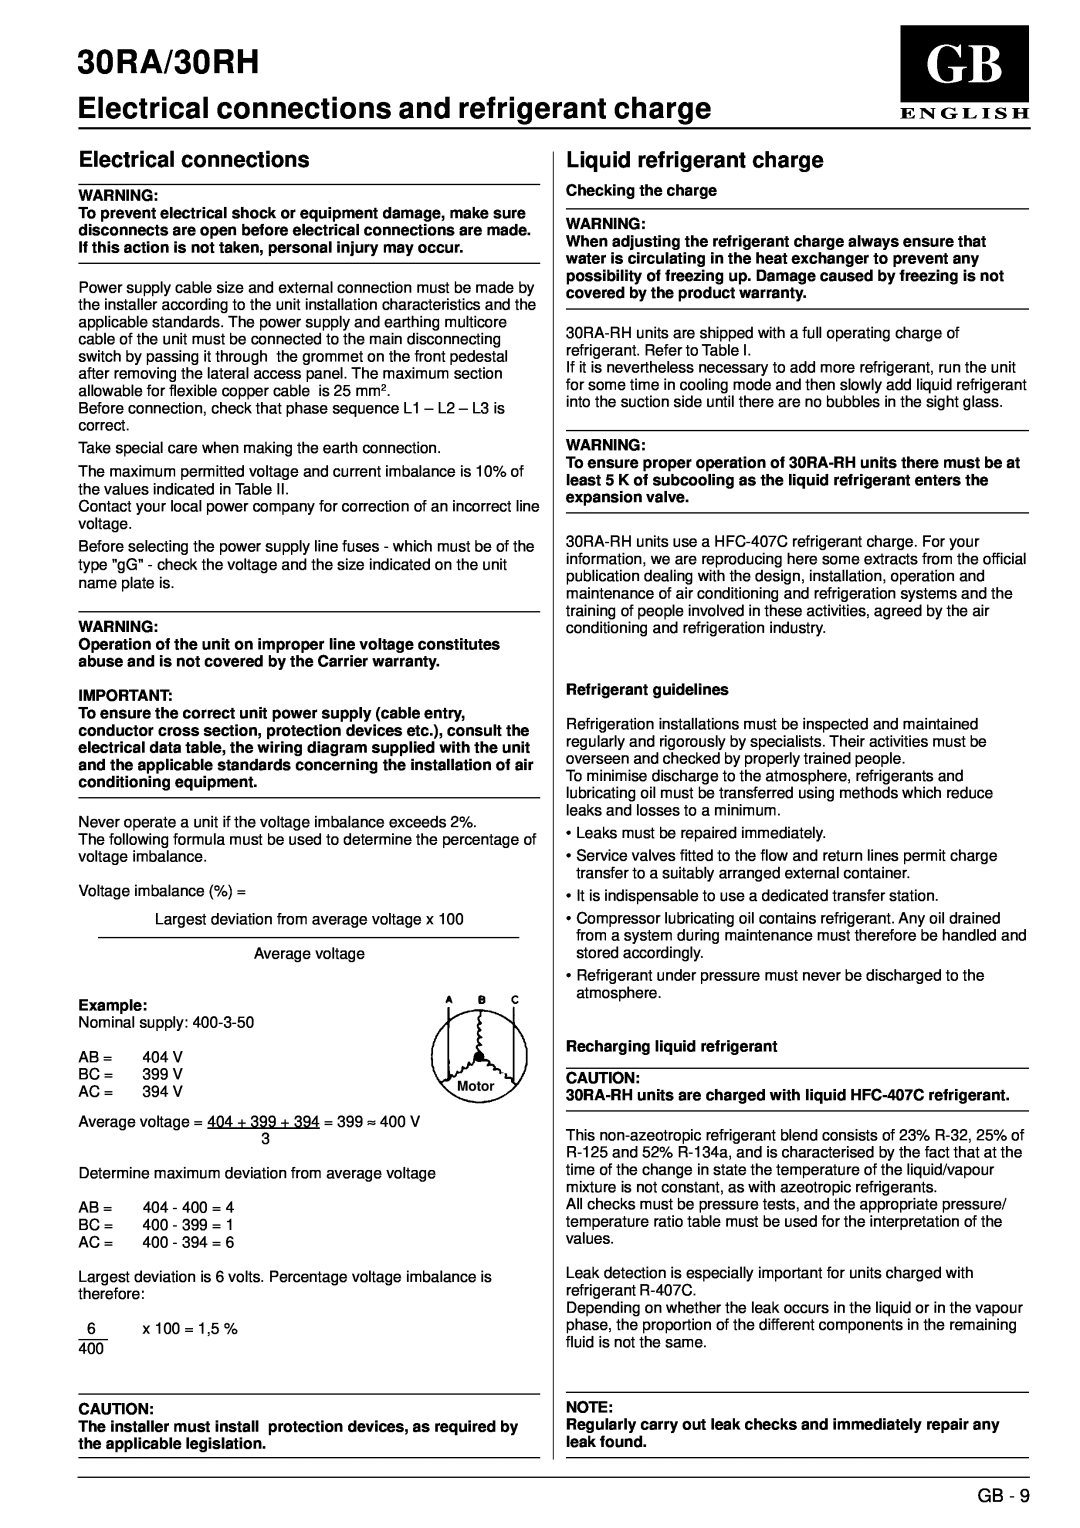 Carrier manual Electrical connections and refrigerant charge, 30RA/30RH, Gb, E N G L I S H, Checking the charge 